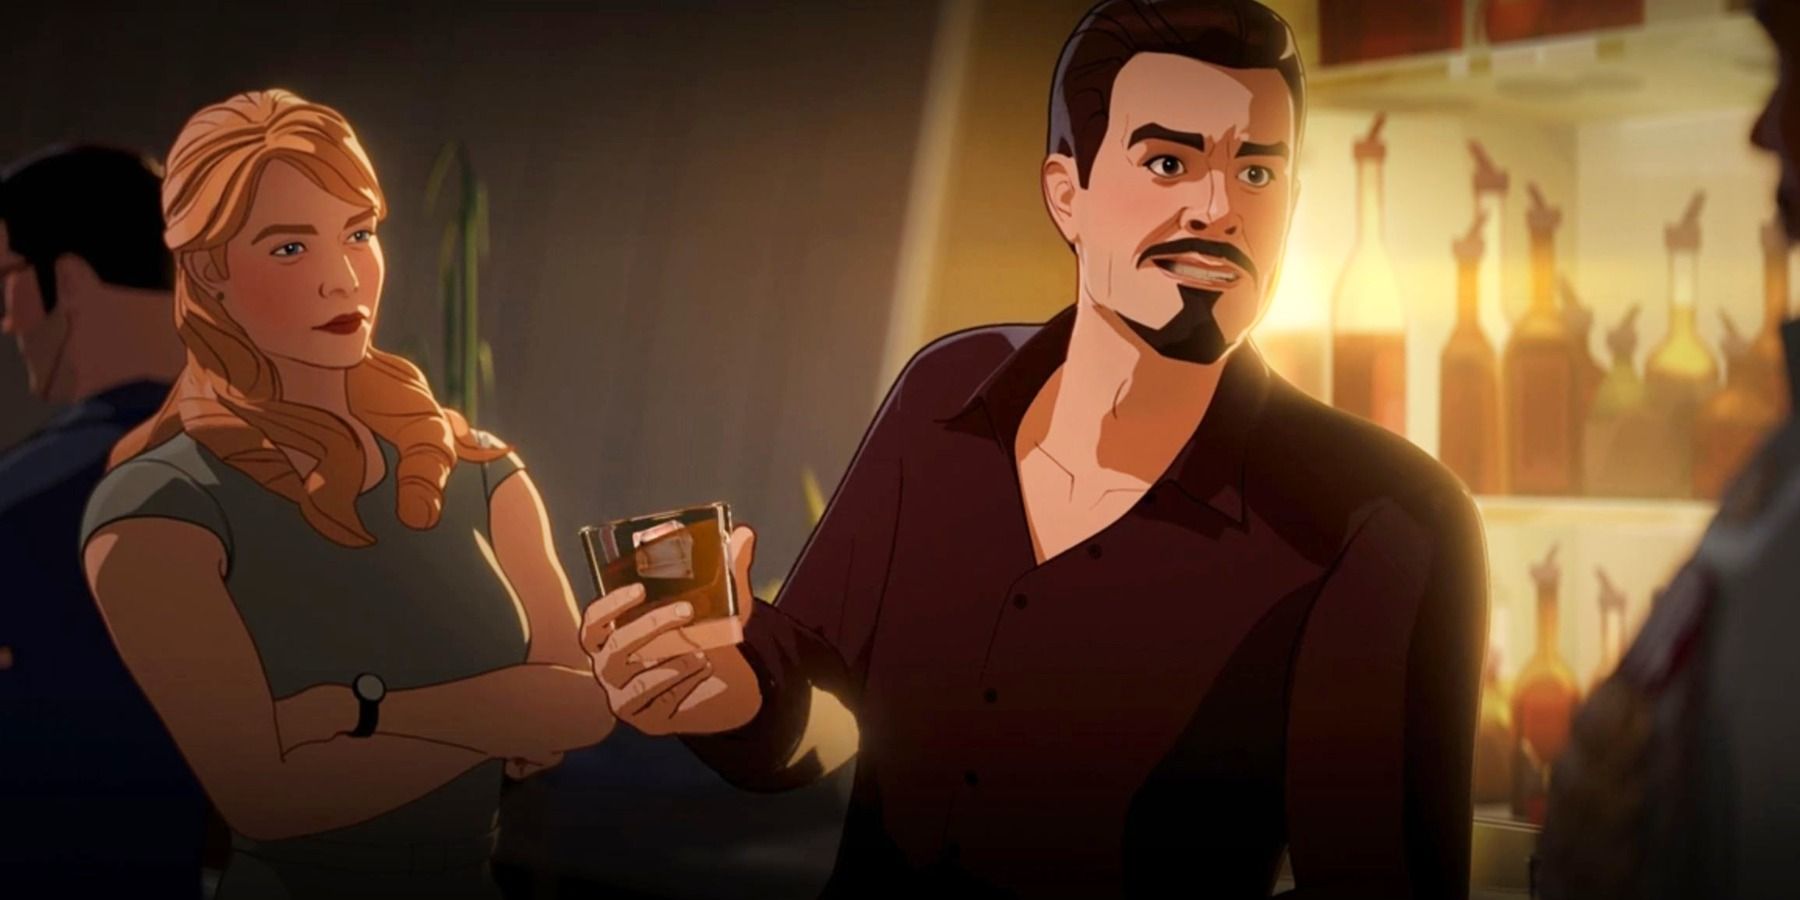 Tony Stark and Pepper Potts What If...?